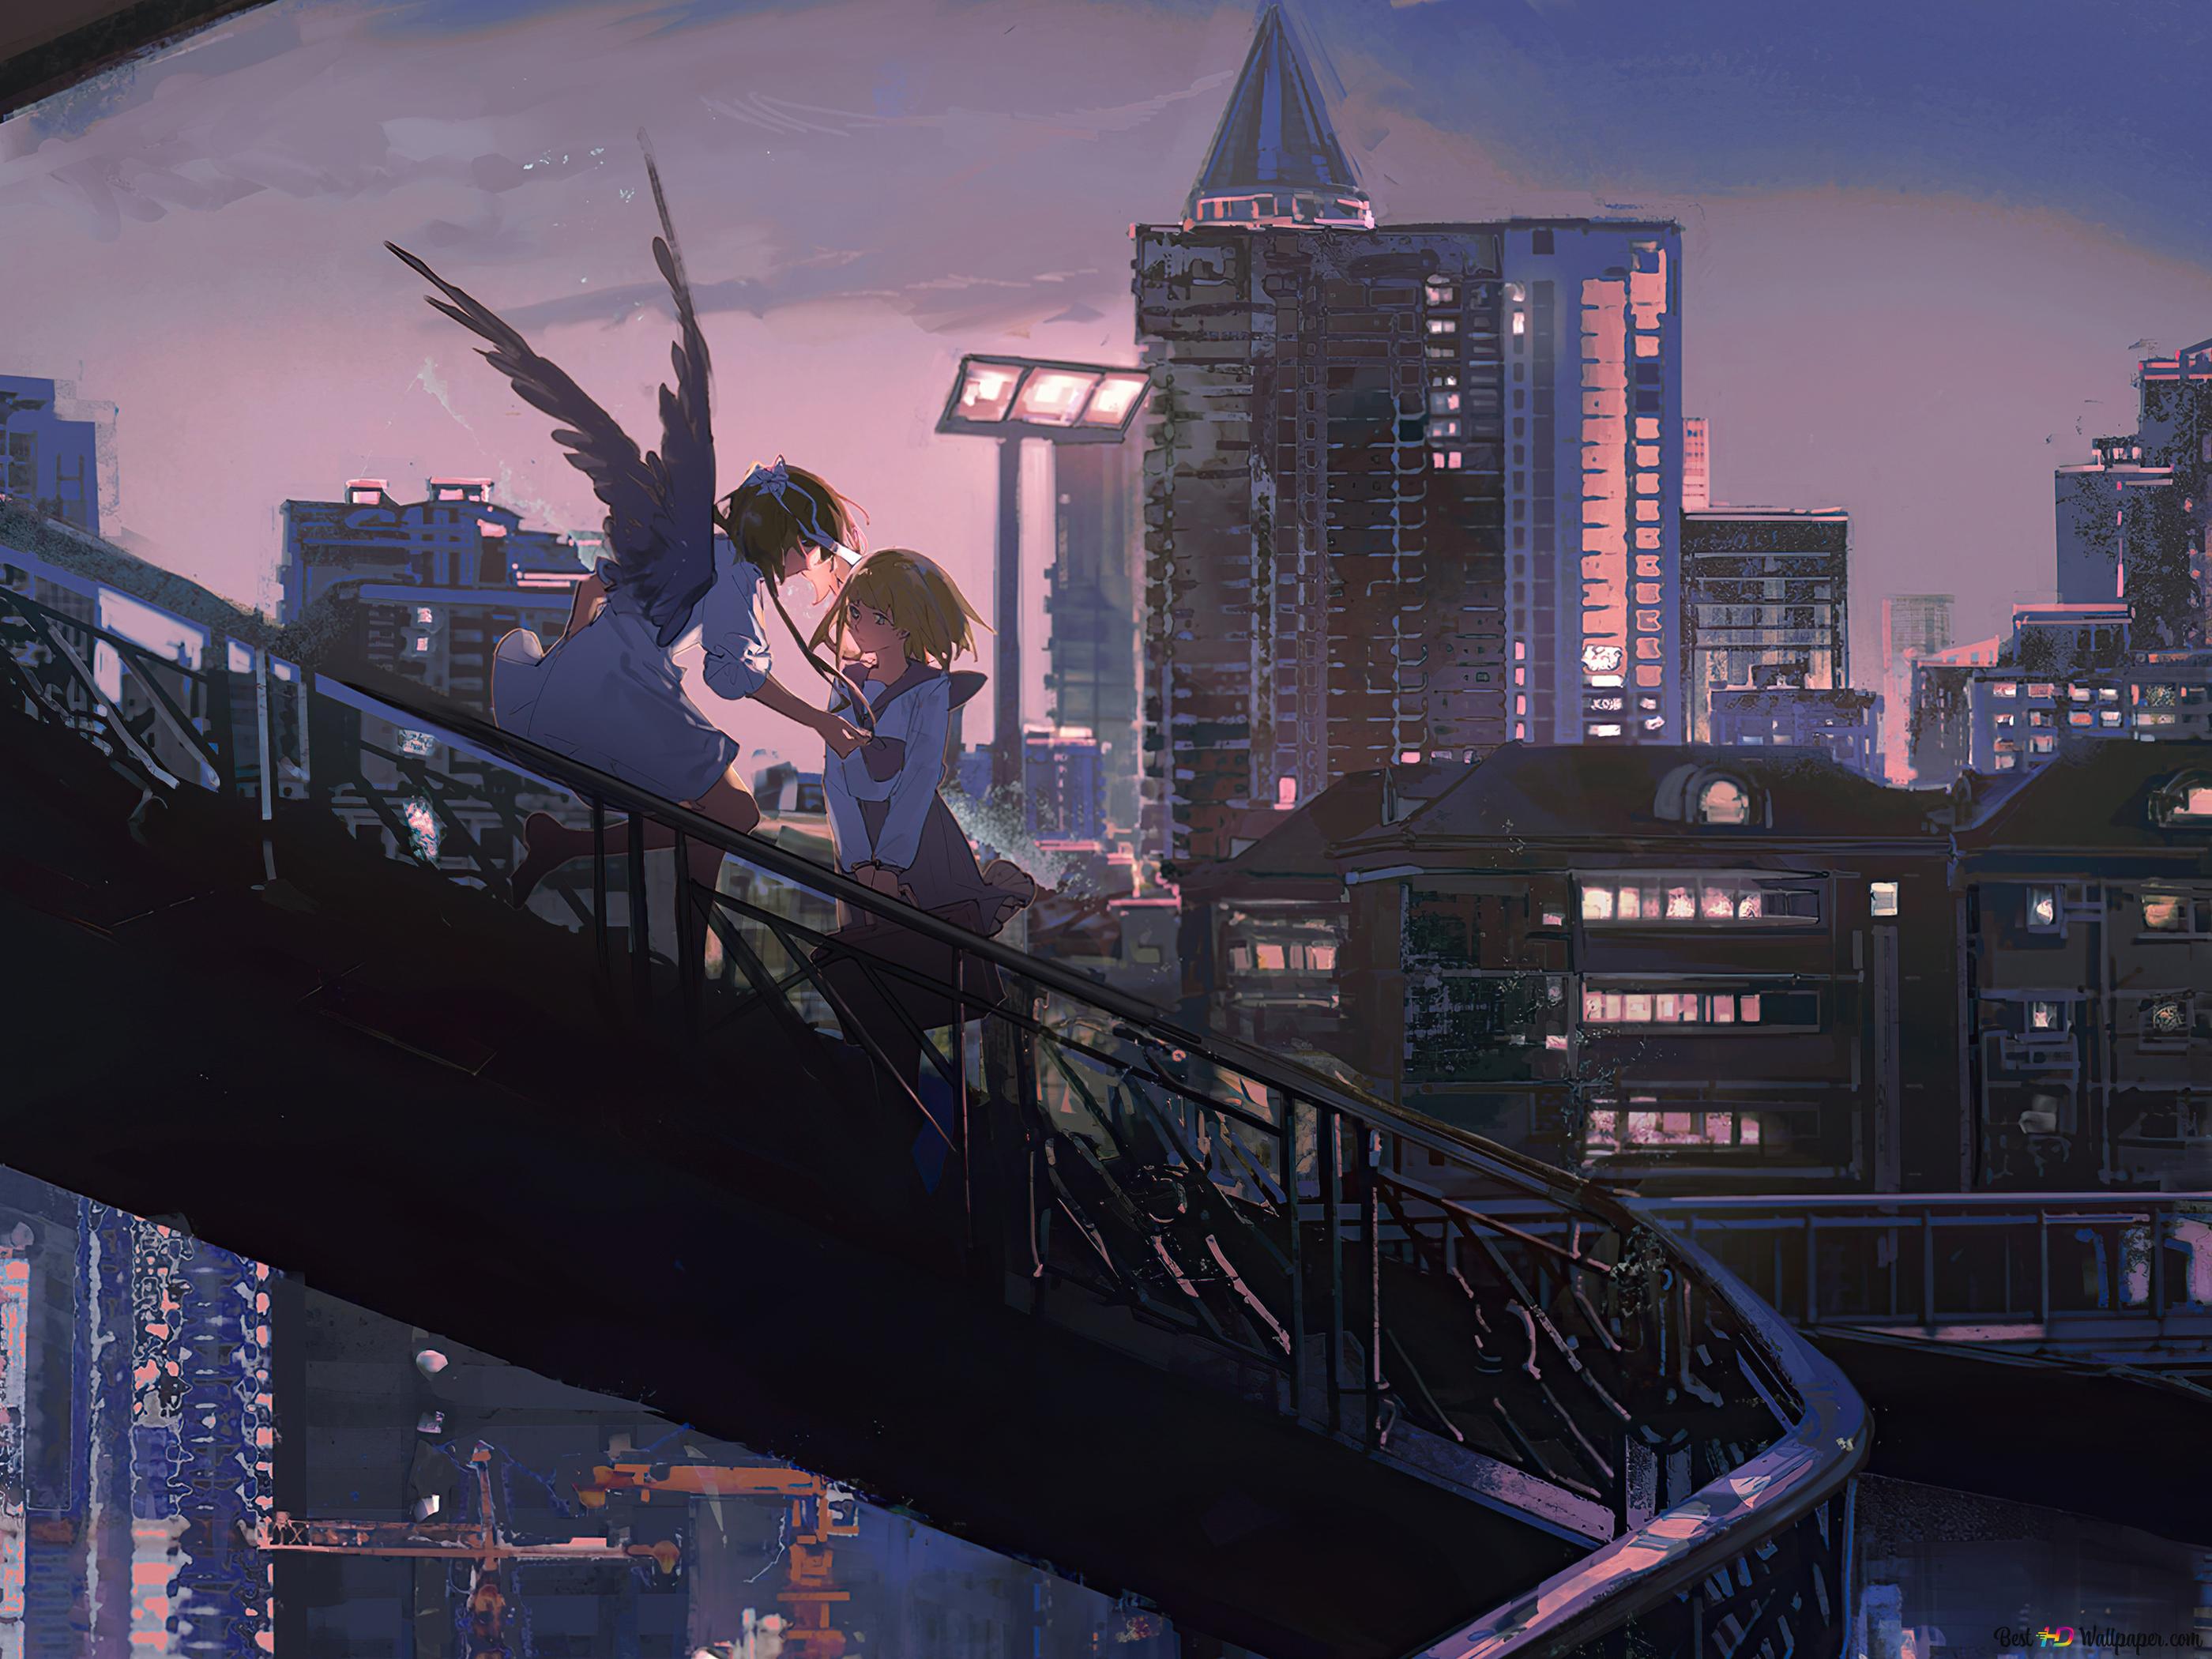 Anime Girls On The Top Of There Town 4K wallpaper download